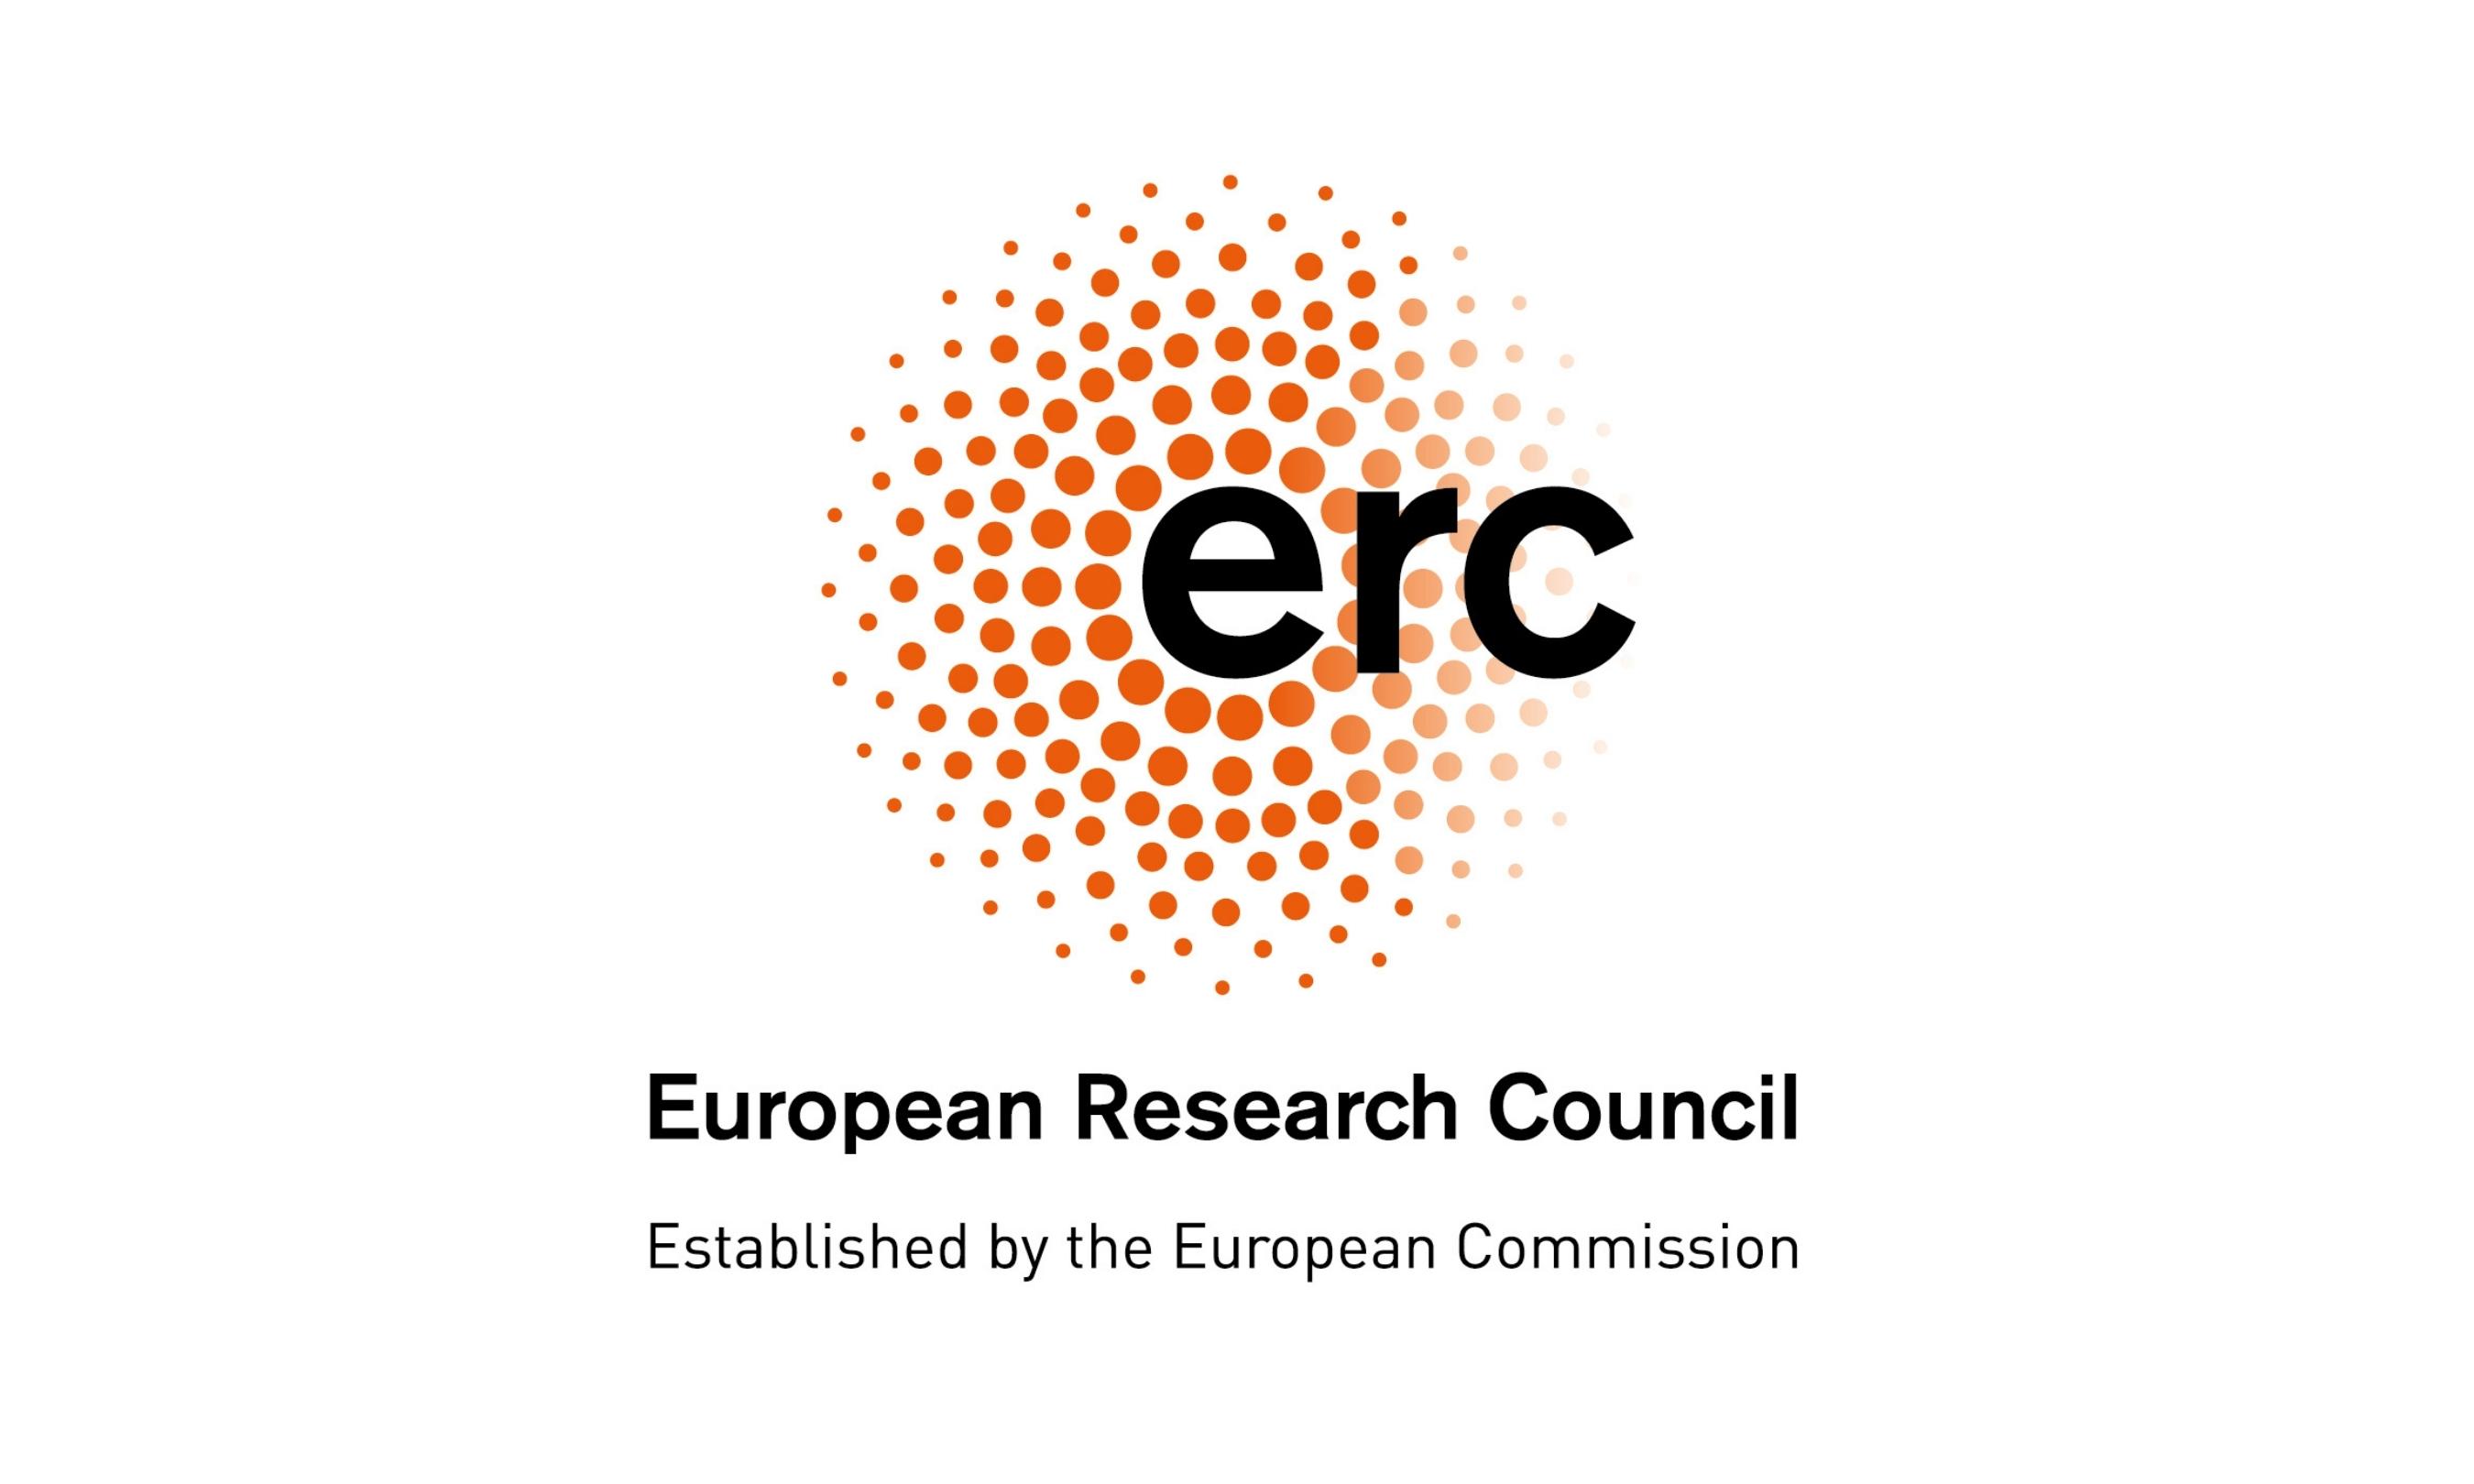 Cover image of Applying for an ERC grant? Have questions? Doubts? Need a first-hand info?